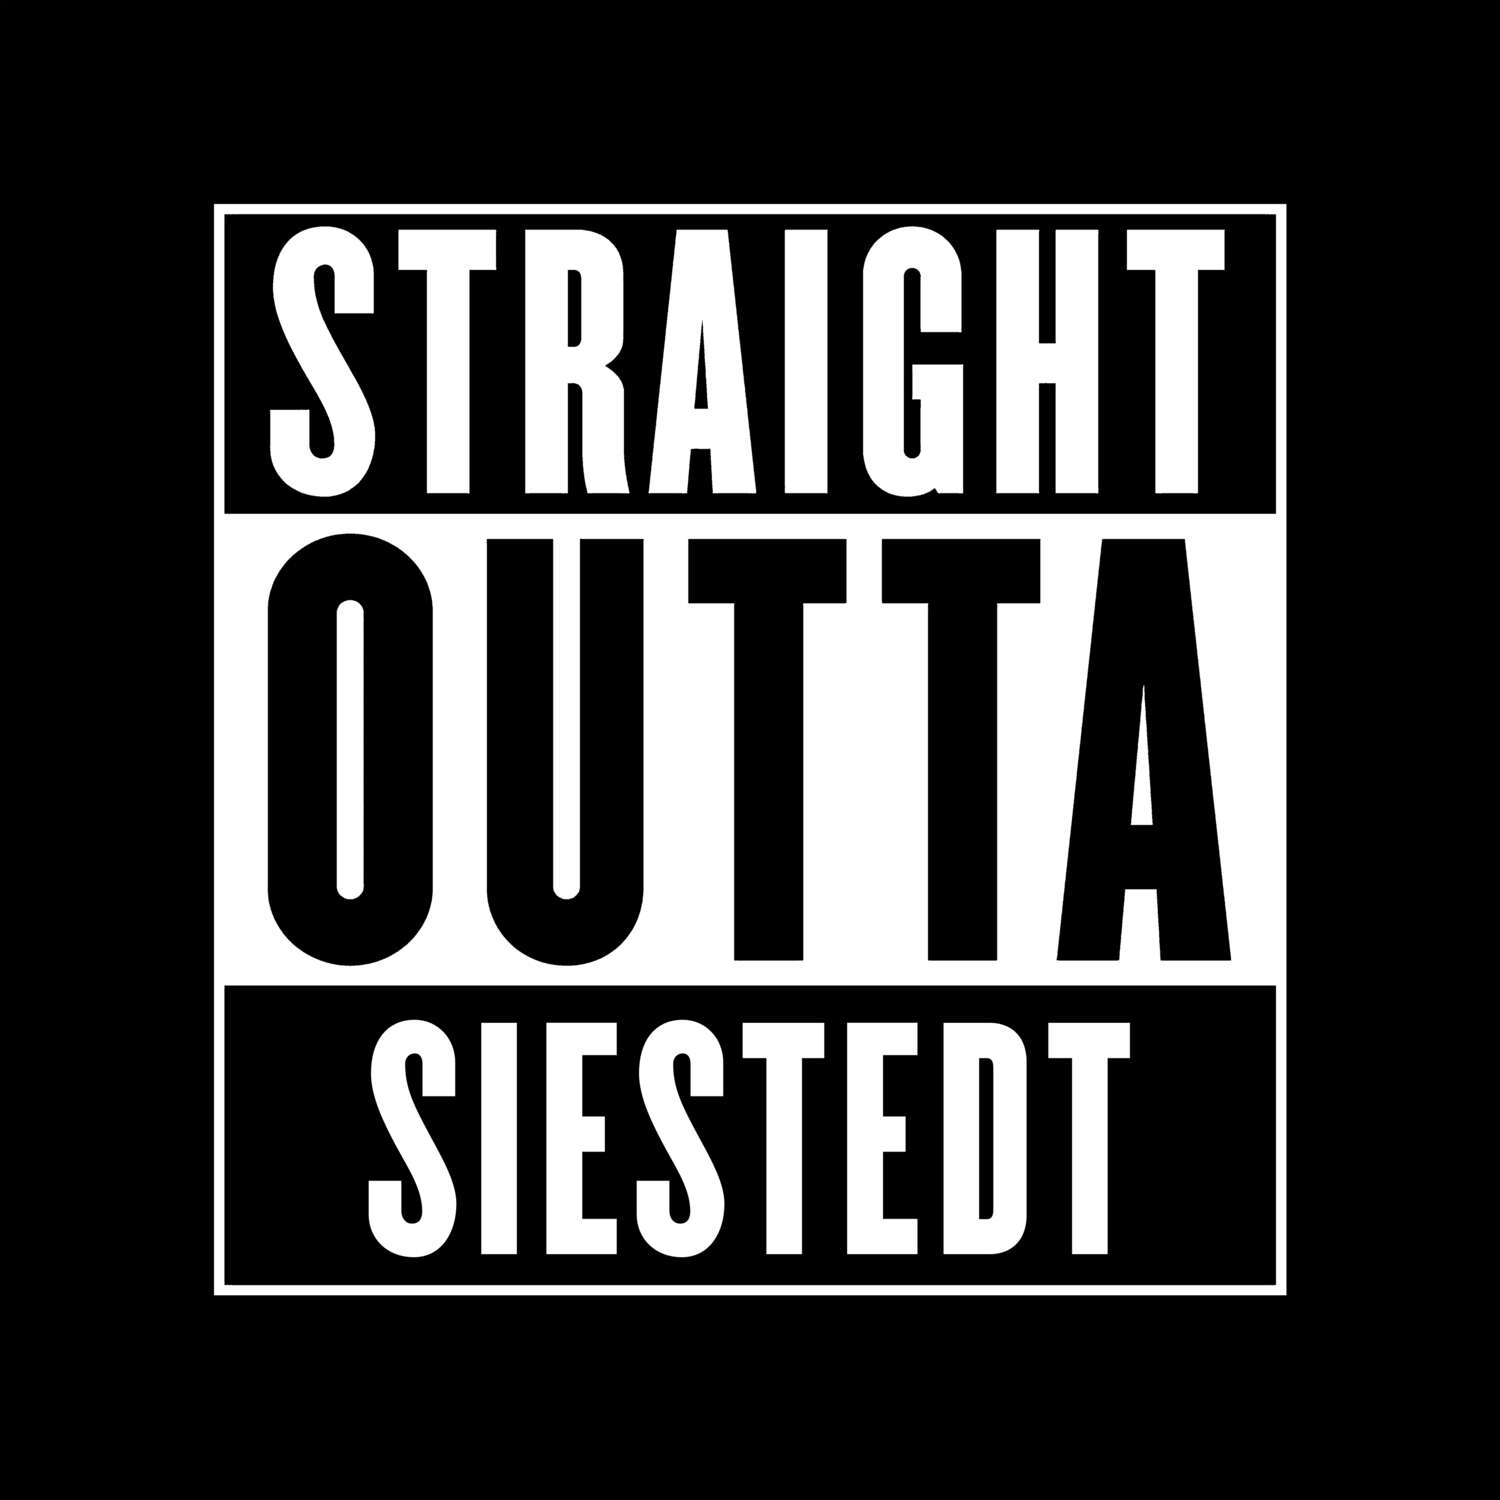 Siestedt T-Shirt »Straight Outta«